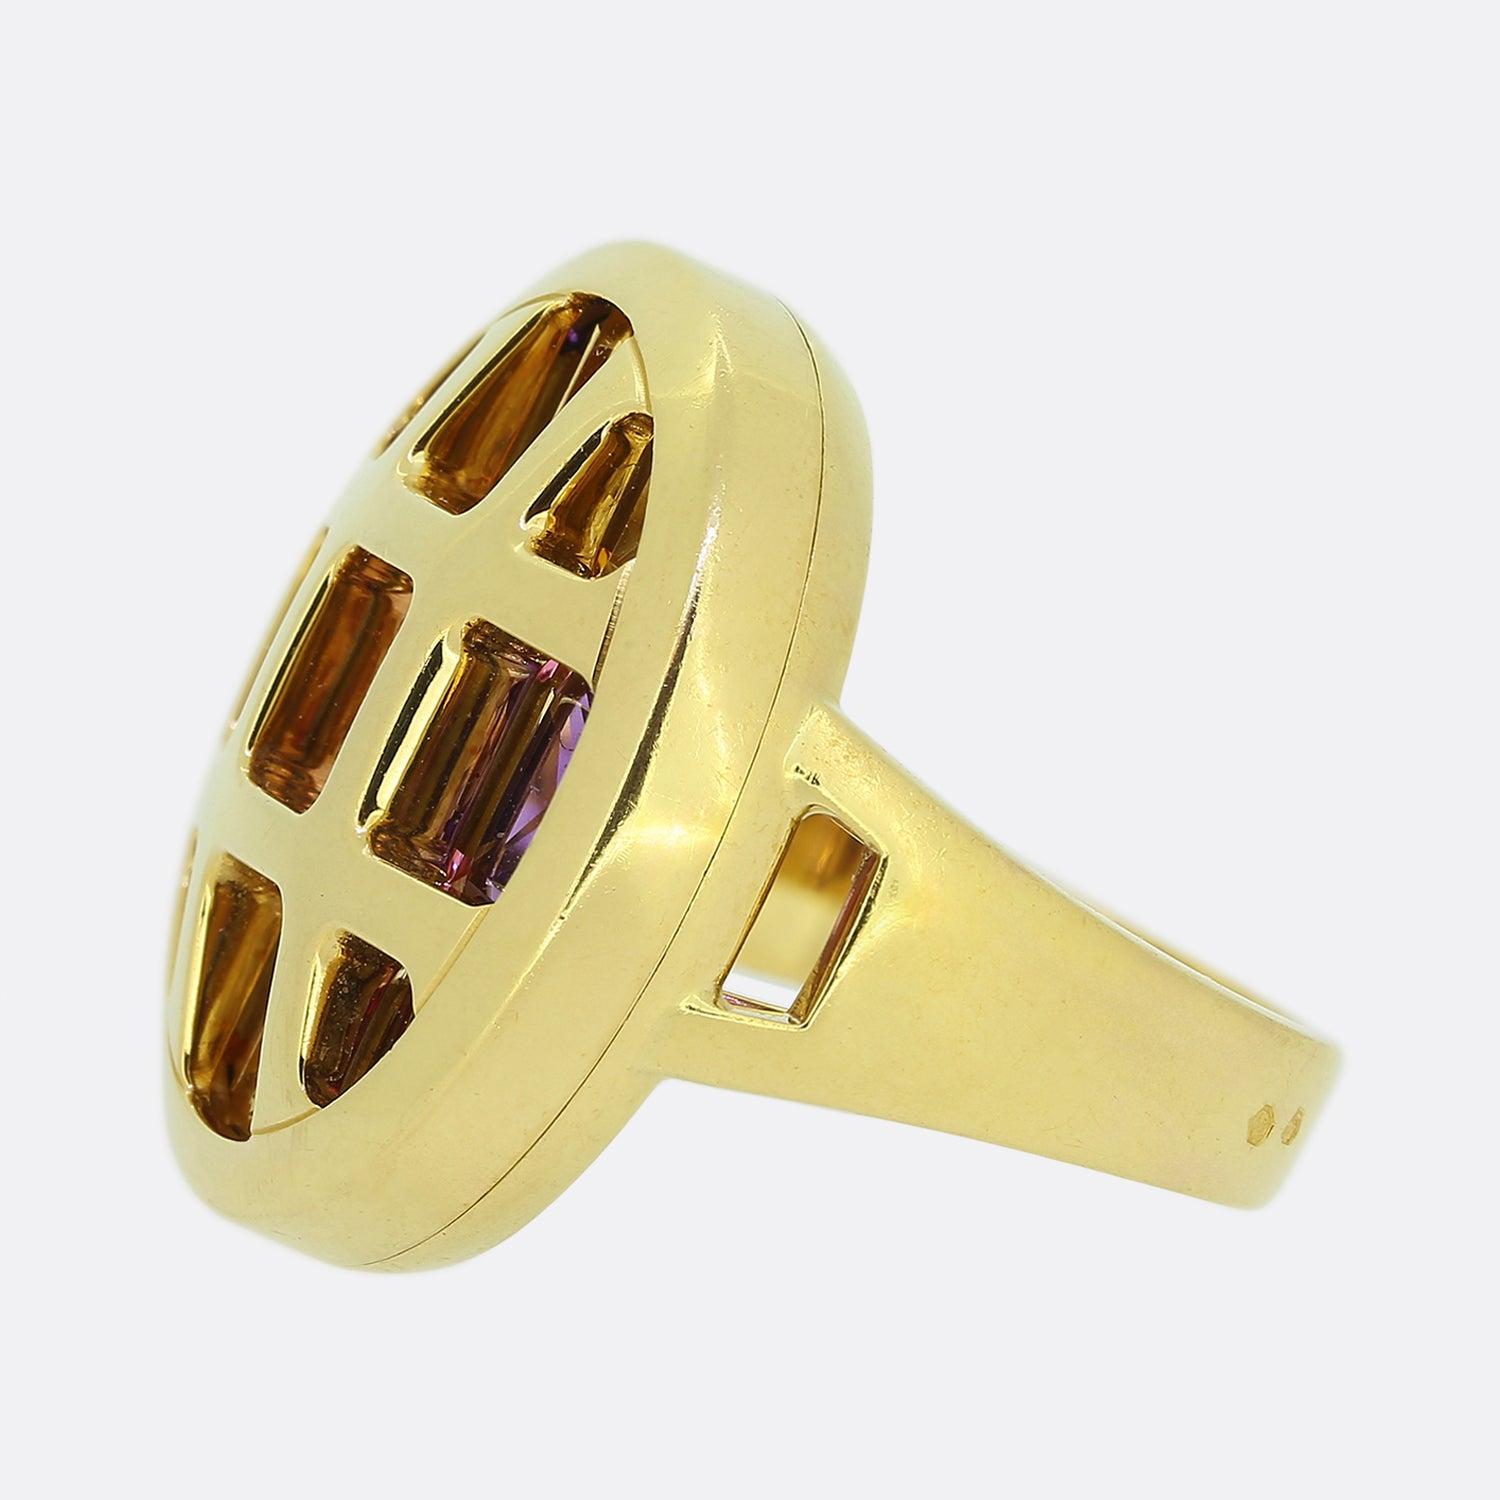 Here we have a fabulous multi gemstone ring from the world renowned luxury jewellery house of Cartier. A large rounded head has been crafted from 18ct yellow gold with square and triangular shaped openings playing host to matching sized gemstones